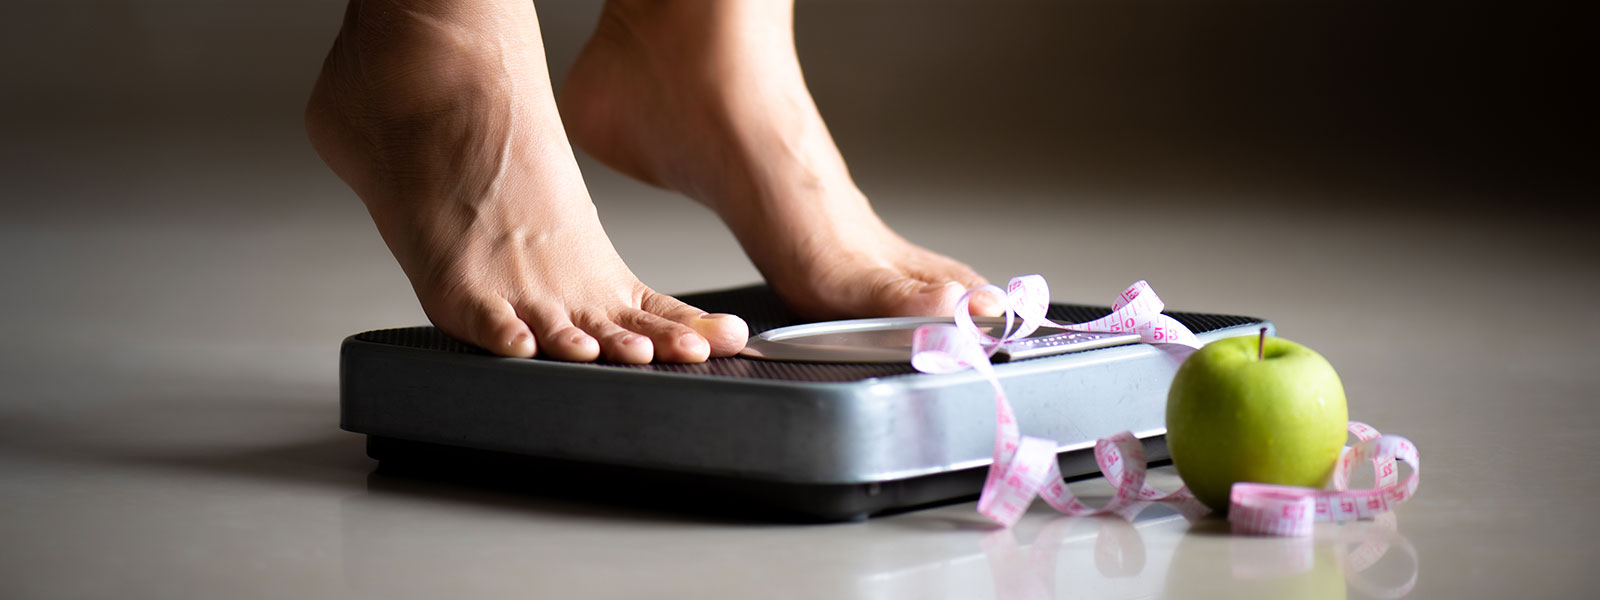 You are currently viewing Basic knowledge about weight loss: A must-see for weight loss beginners